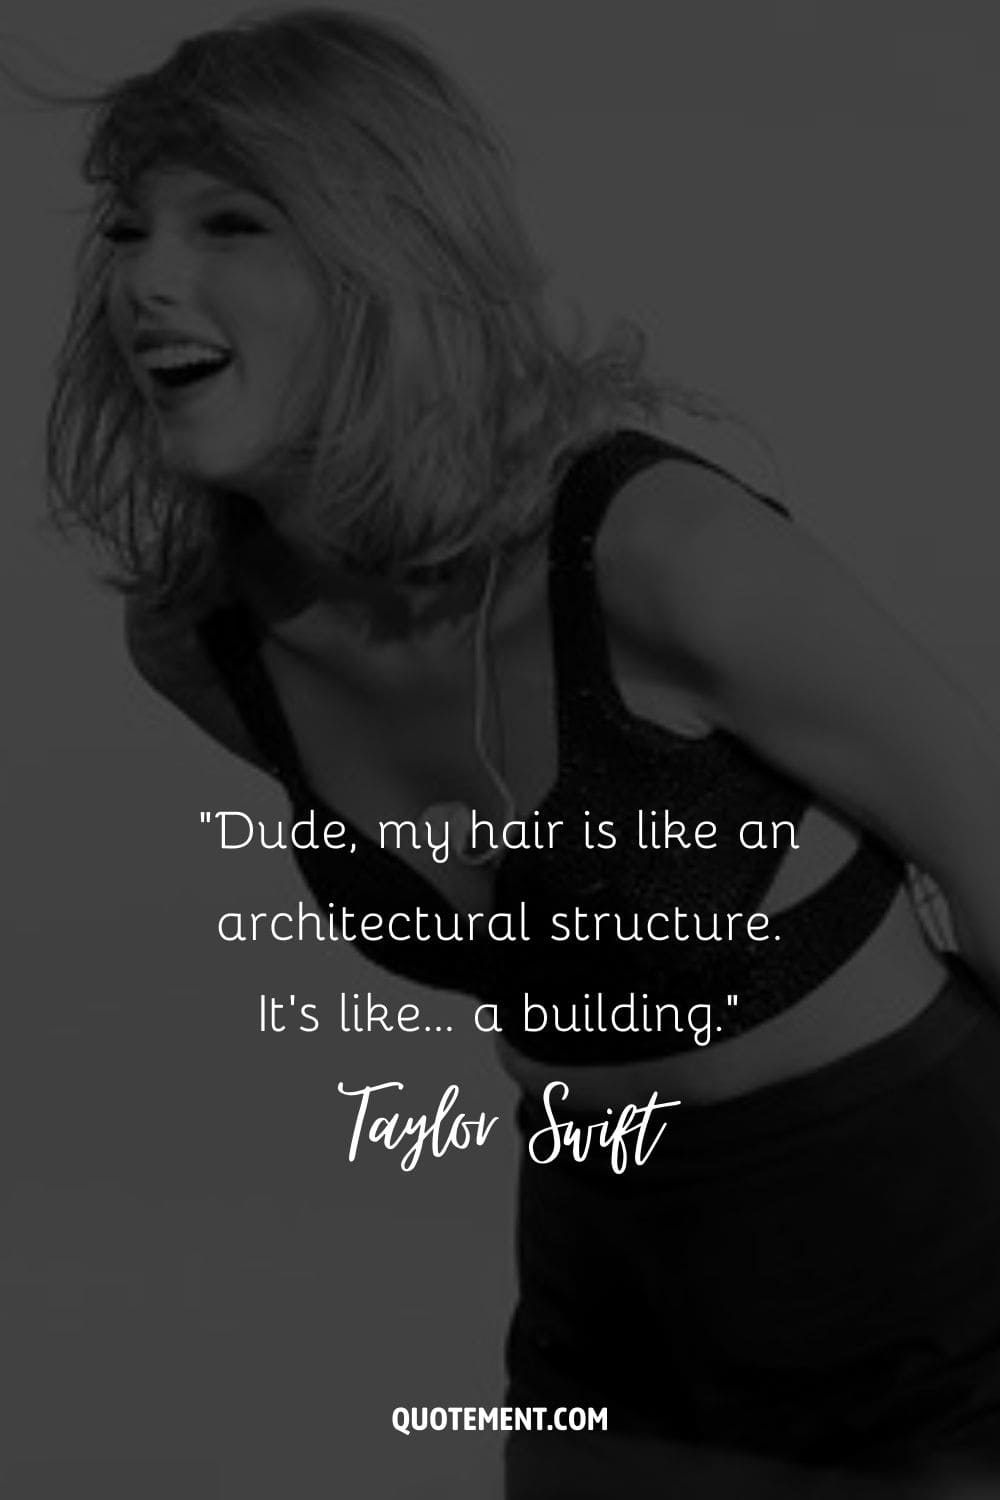 “Dude, my hair is like an architectural structure. It’s like… a building.” ― Taylor Swift